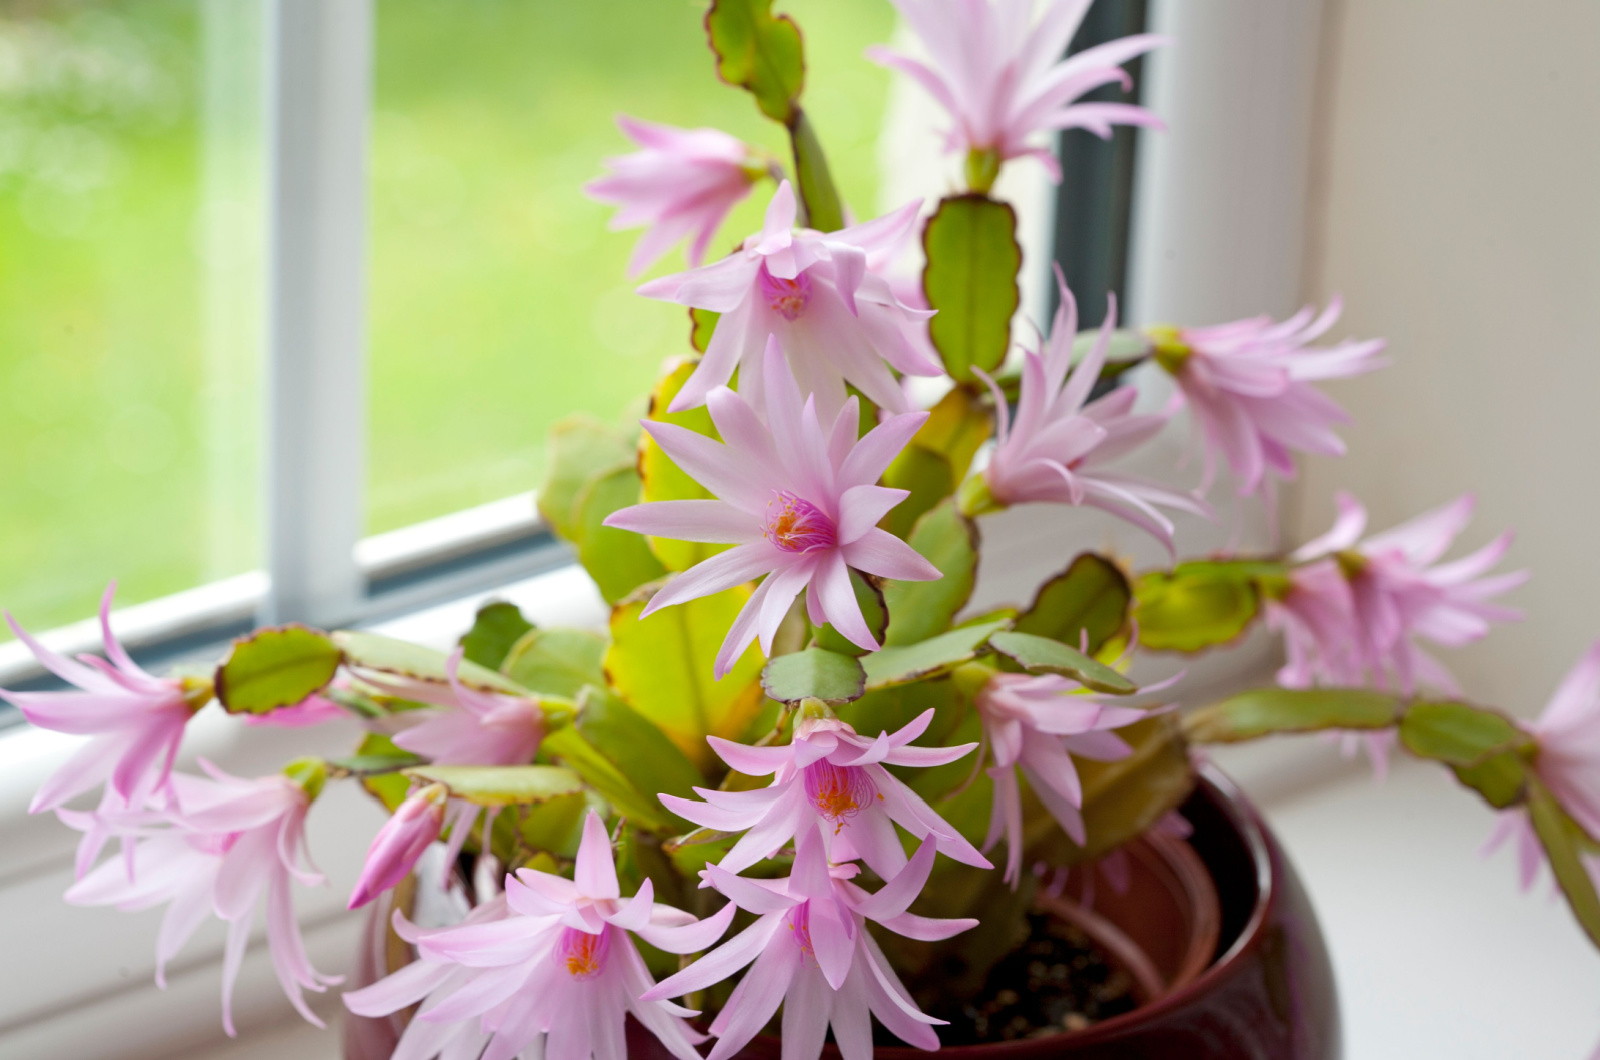 Easter cactus growing in a pot